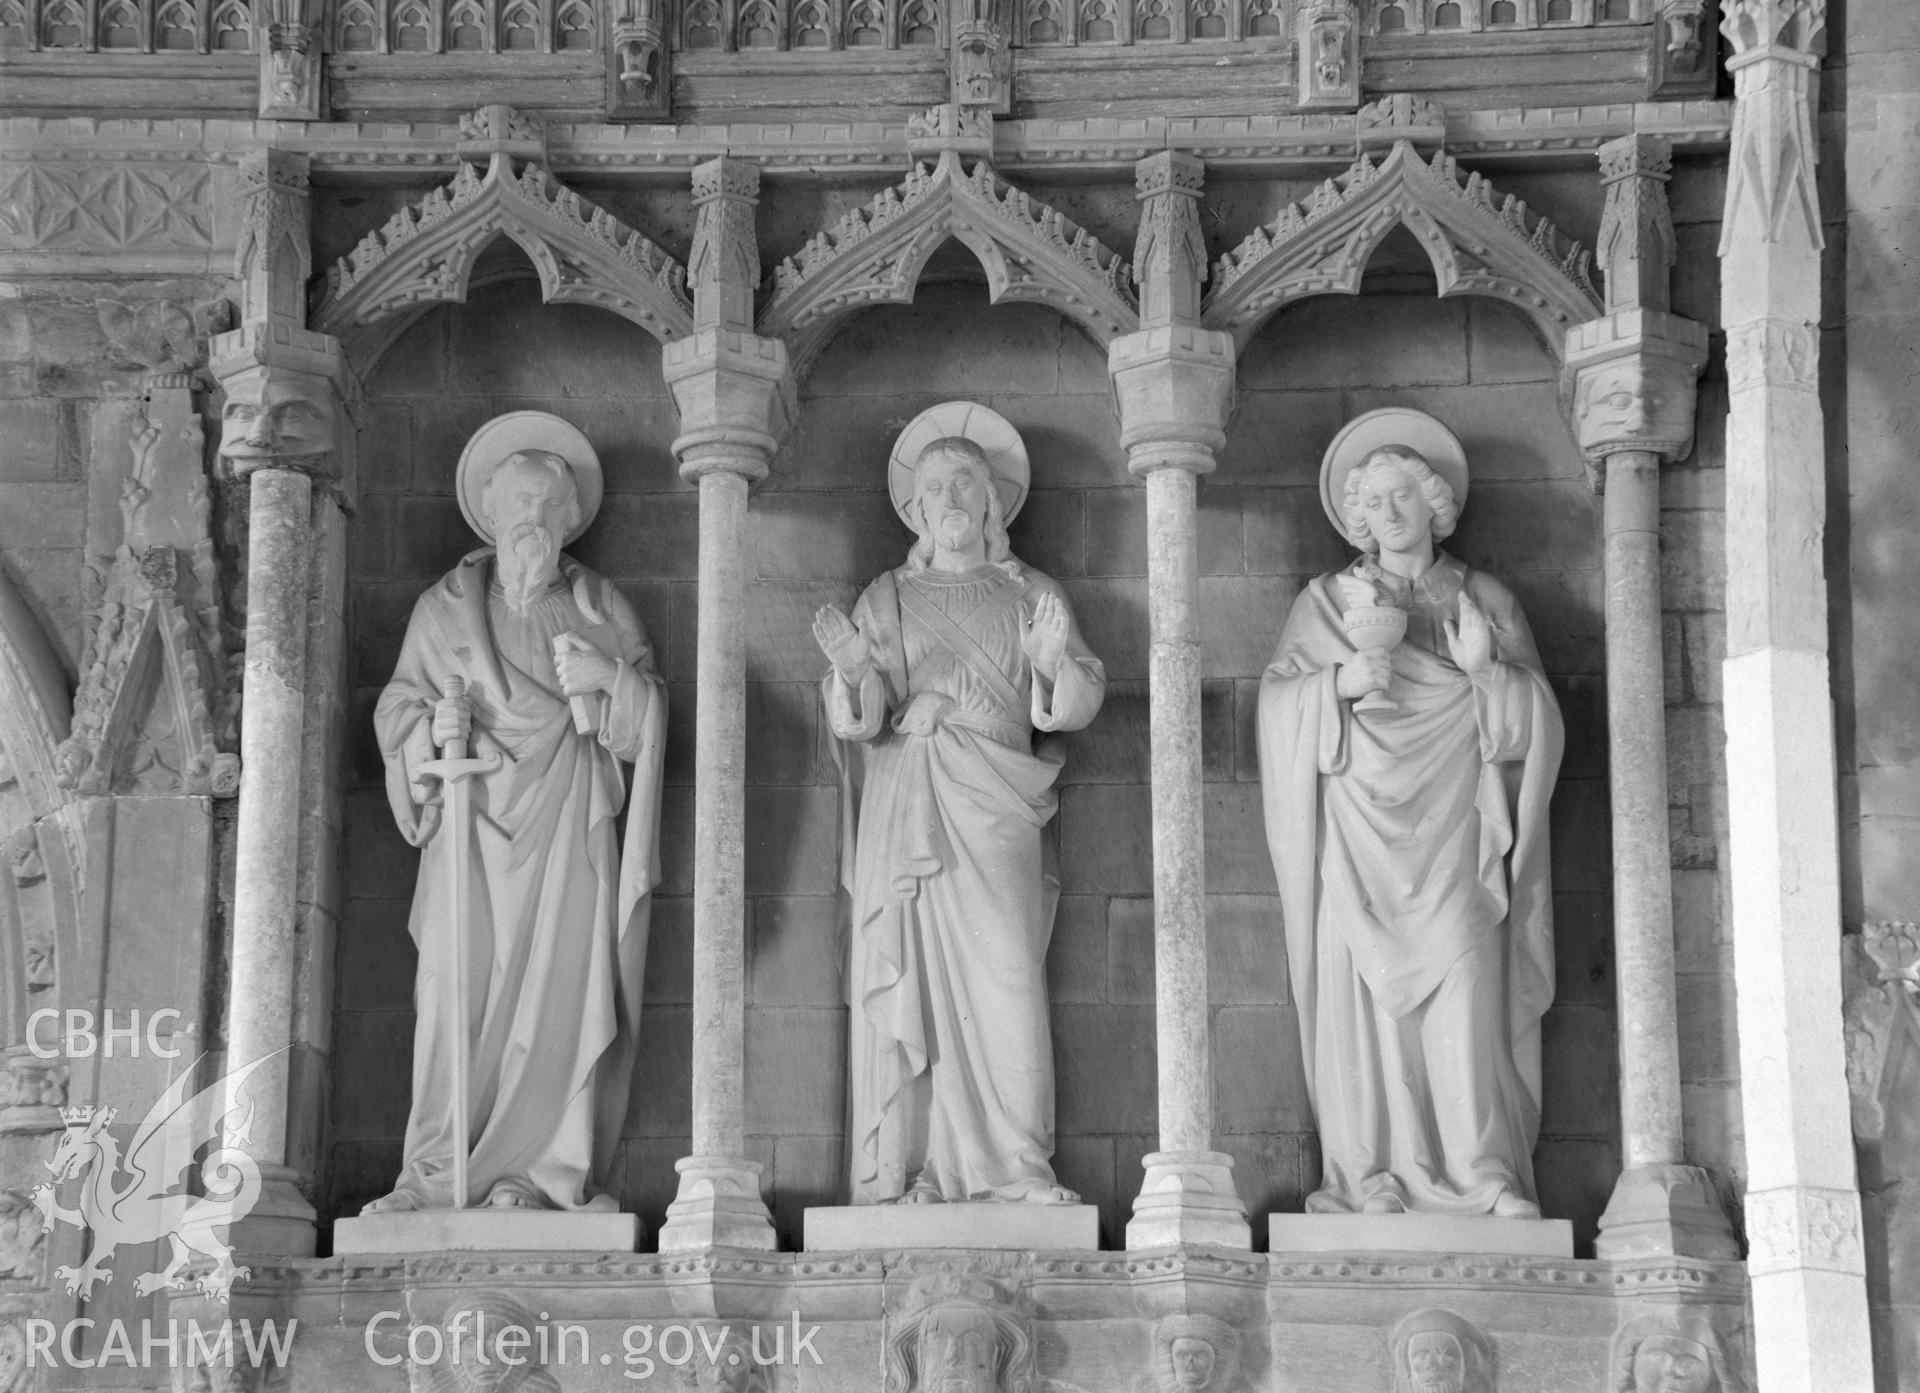 Digital copy of a black and white nitrate negative showing Saint's statues at St David's Cathedral, taken by E.W. Lovegrove, July 1936.